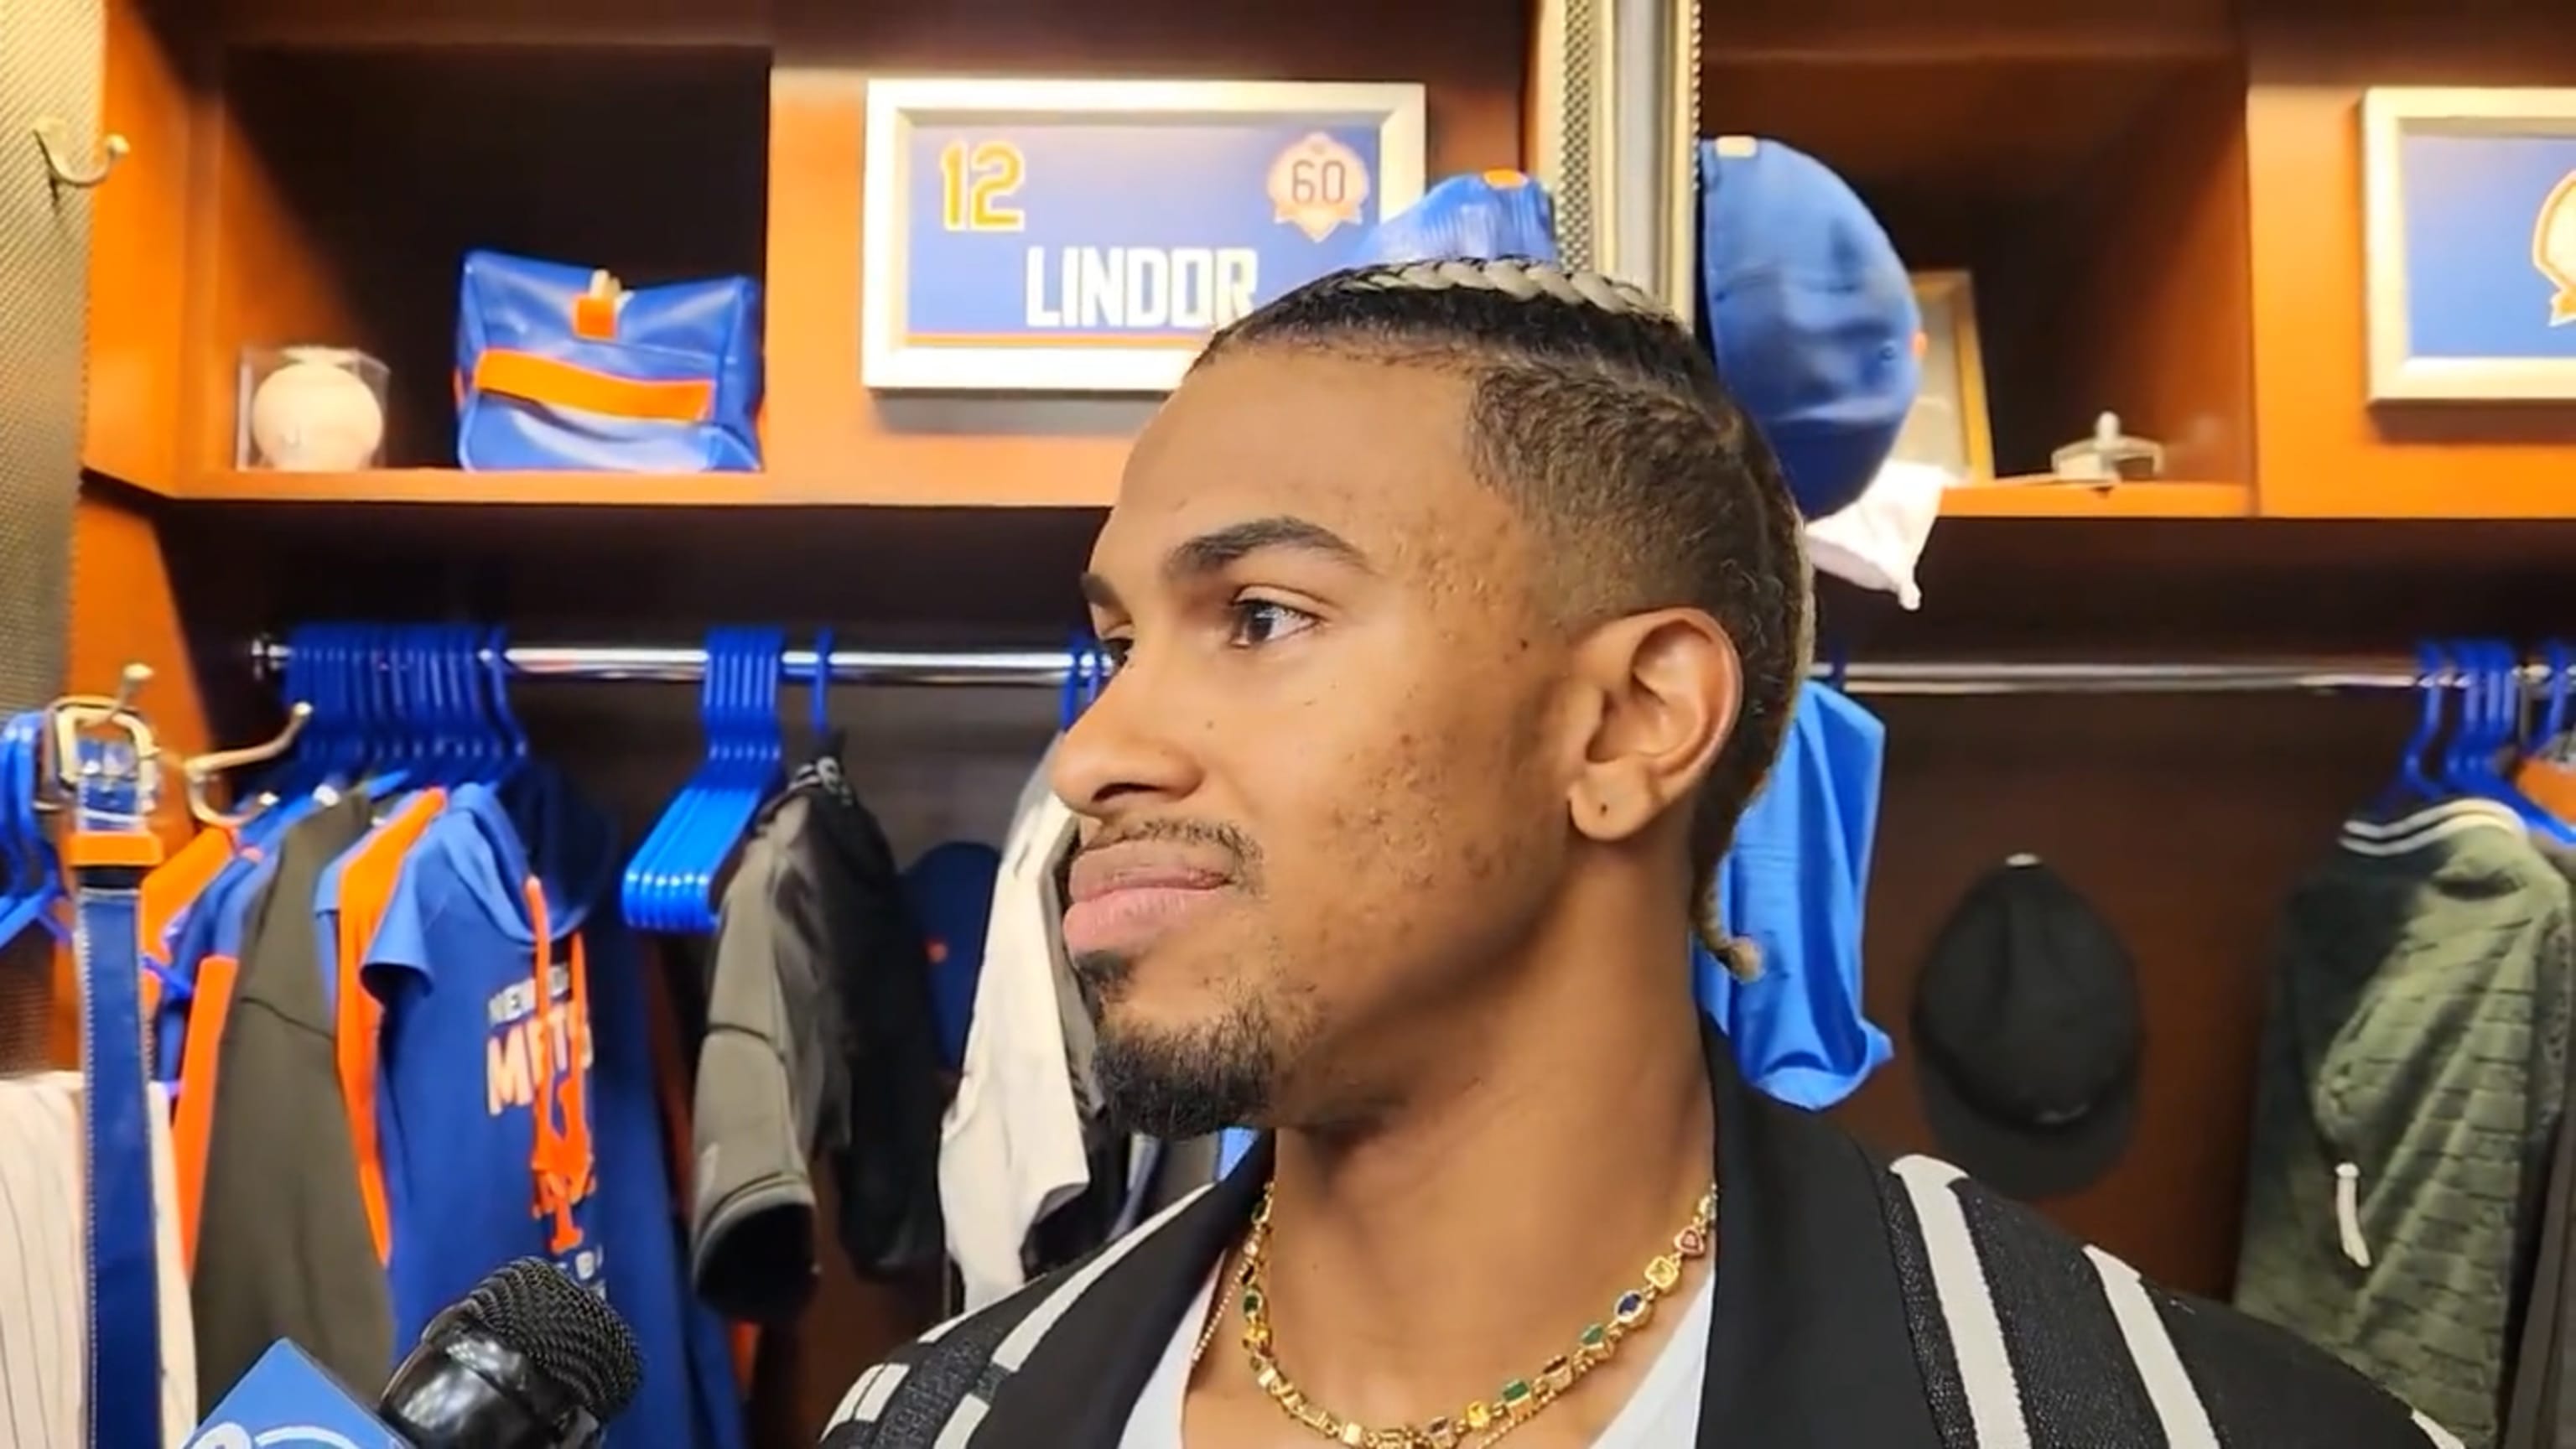 SNY on Instagram: Francisco Lindor cut all of his hair off prior